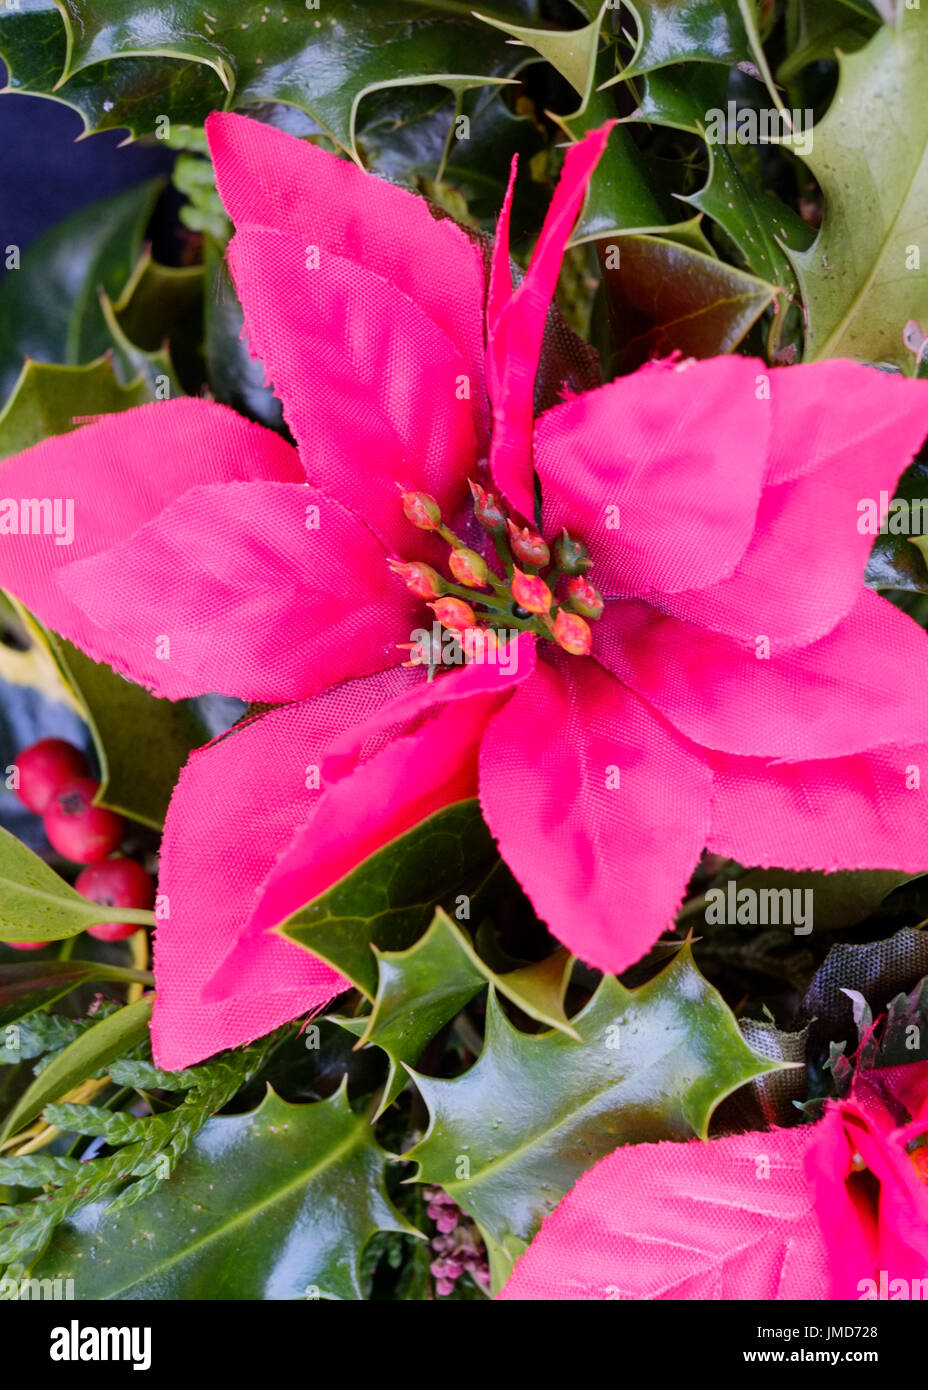 Christmas decoration of artificial flower, surrounded by holly leaves,  attached to a wreath. Stock Photo